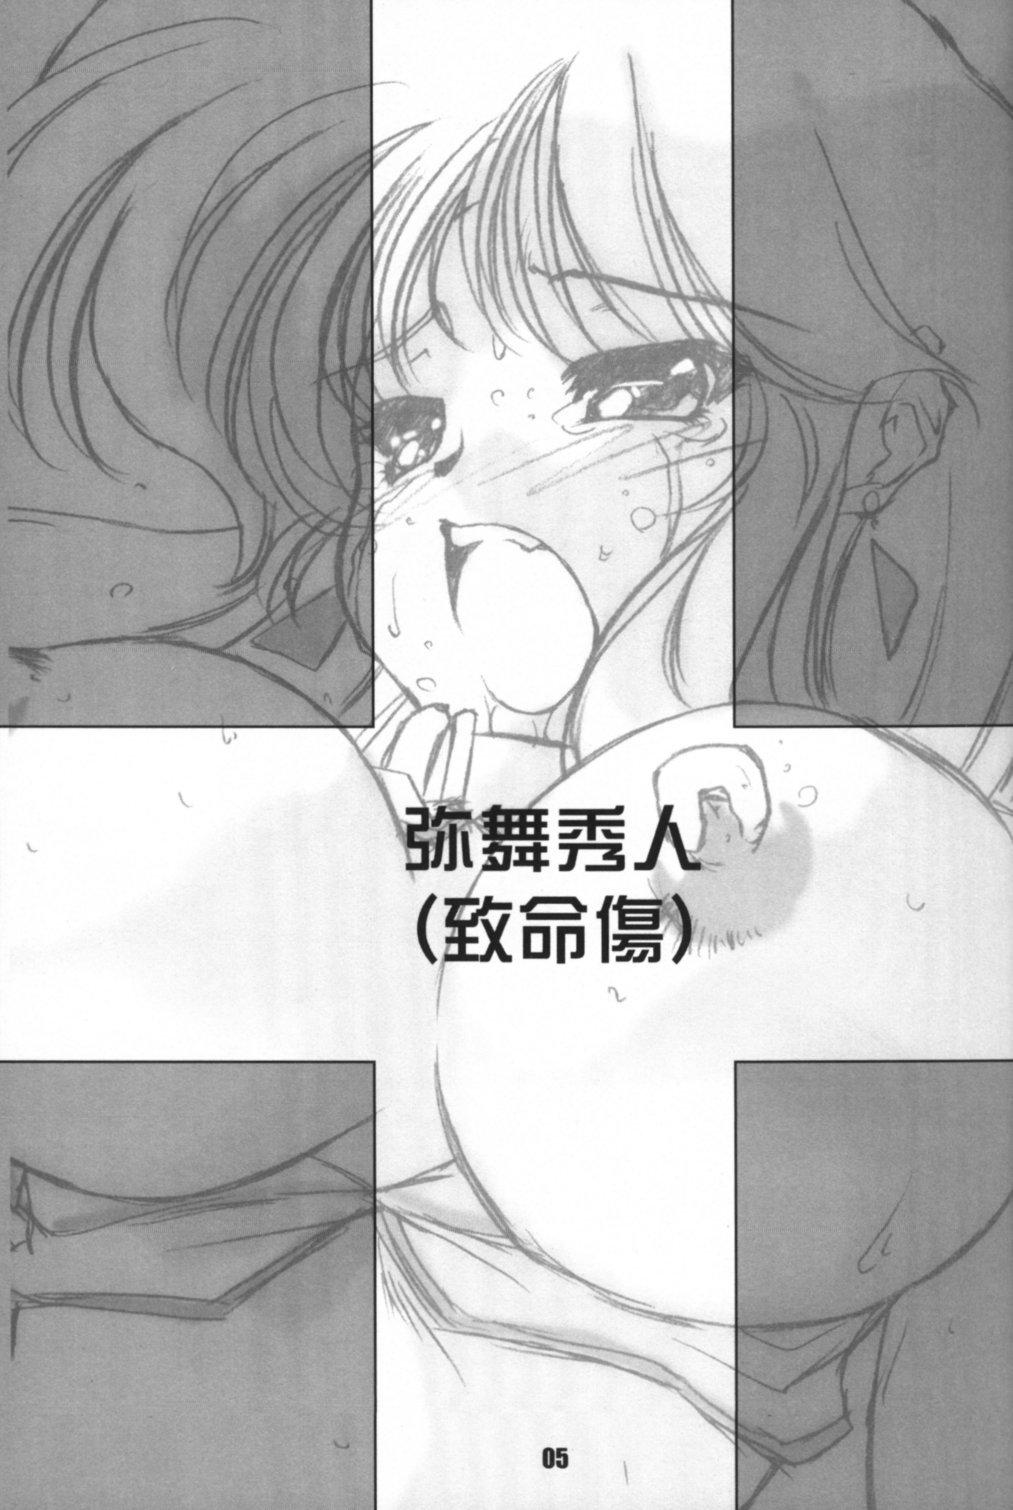 New WORKS Vol.54 Une fleur fascinante. Revision. - Dirty pair Abg - Page 5